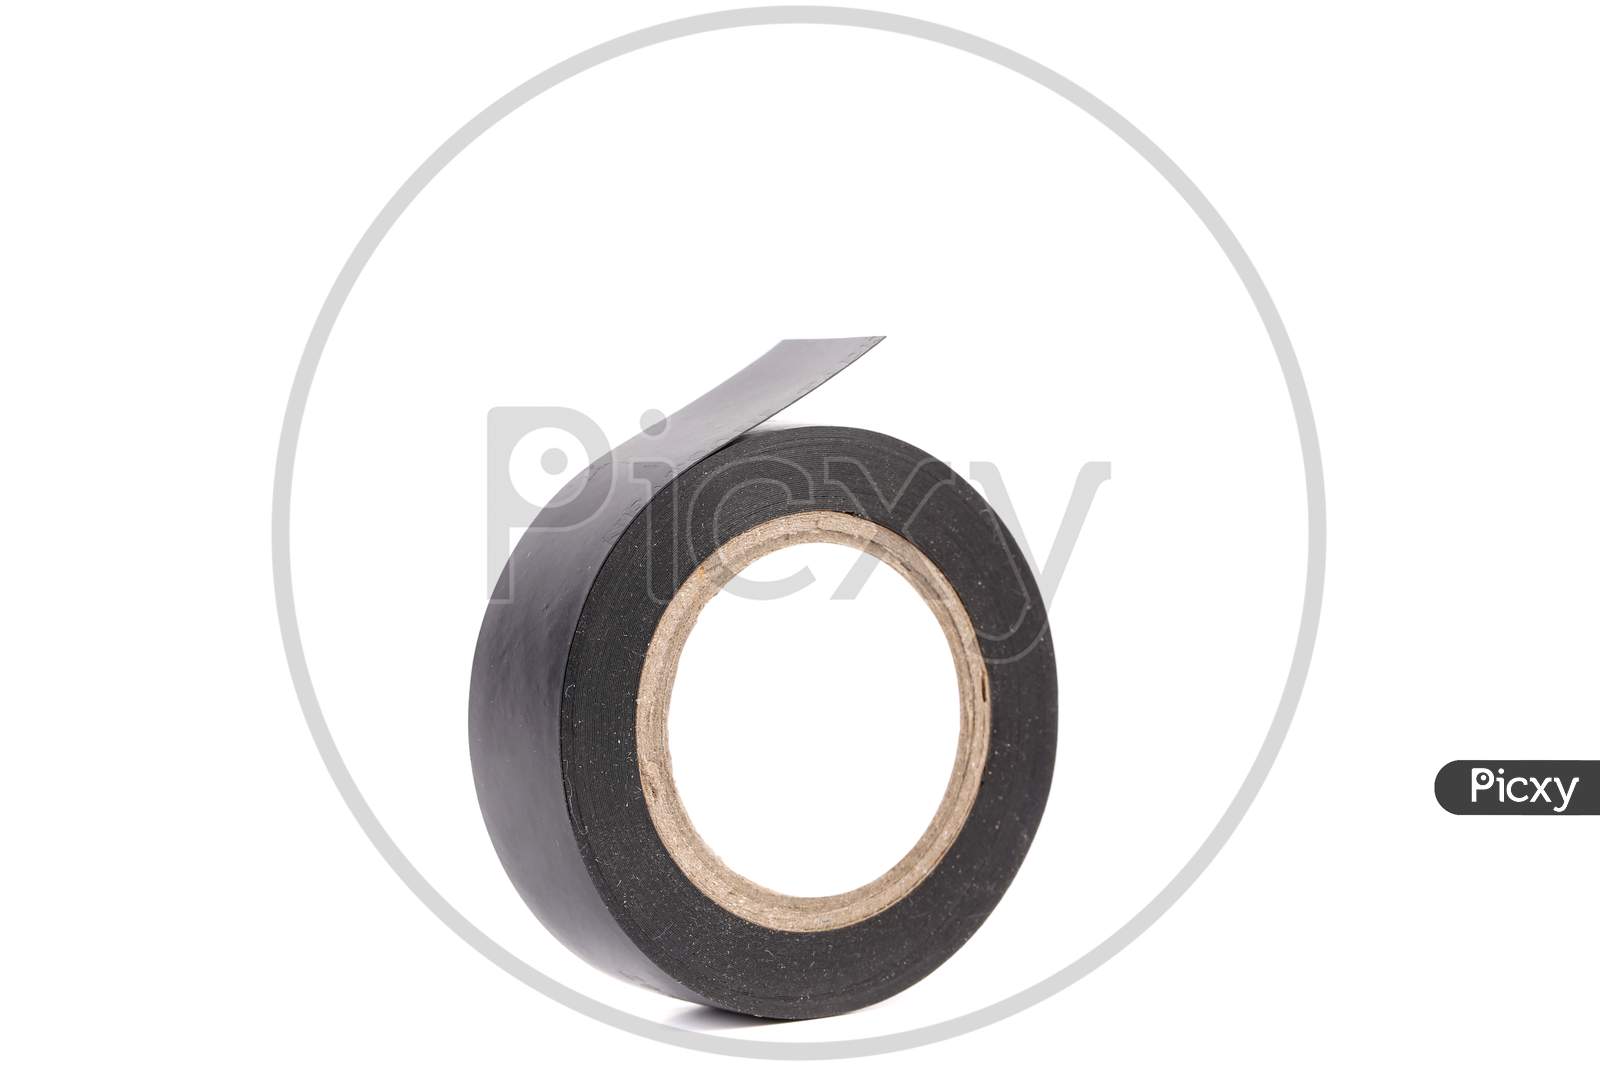 Insulating Tape. Isolated On A White Background.